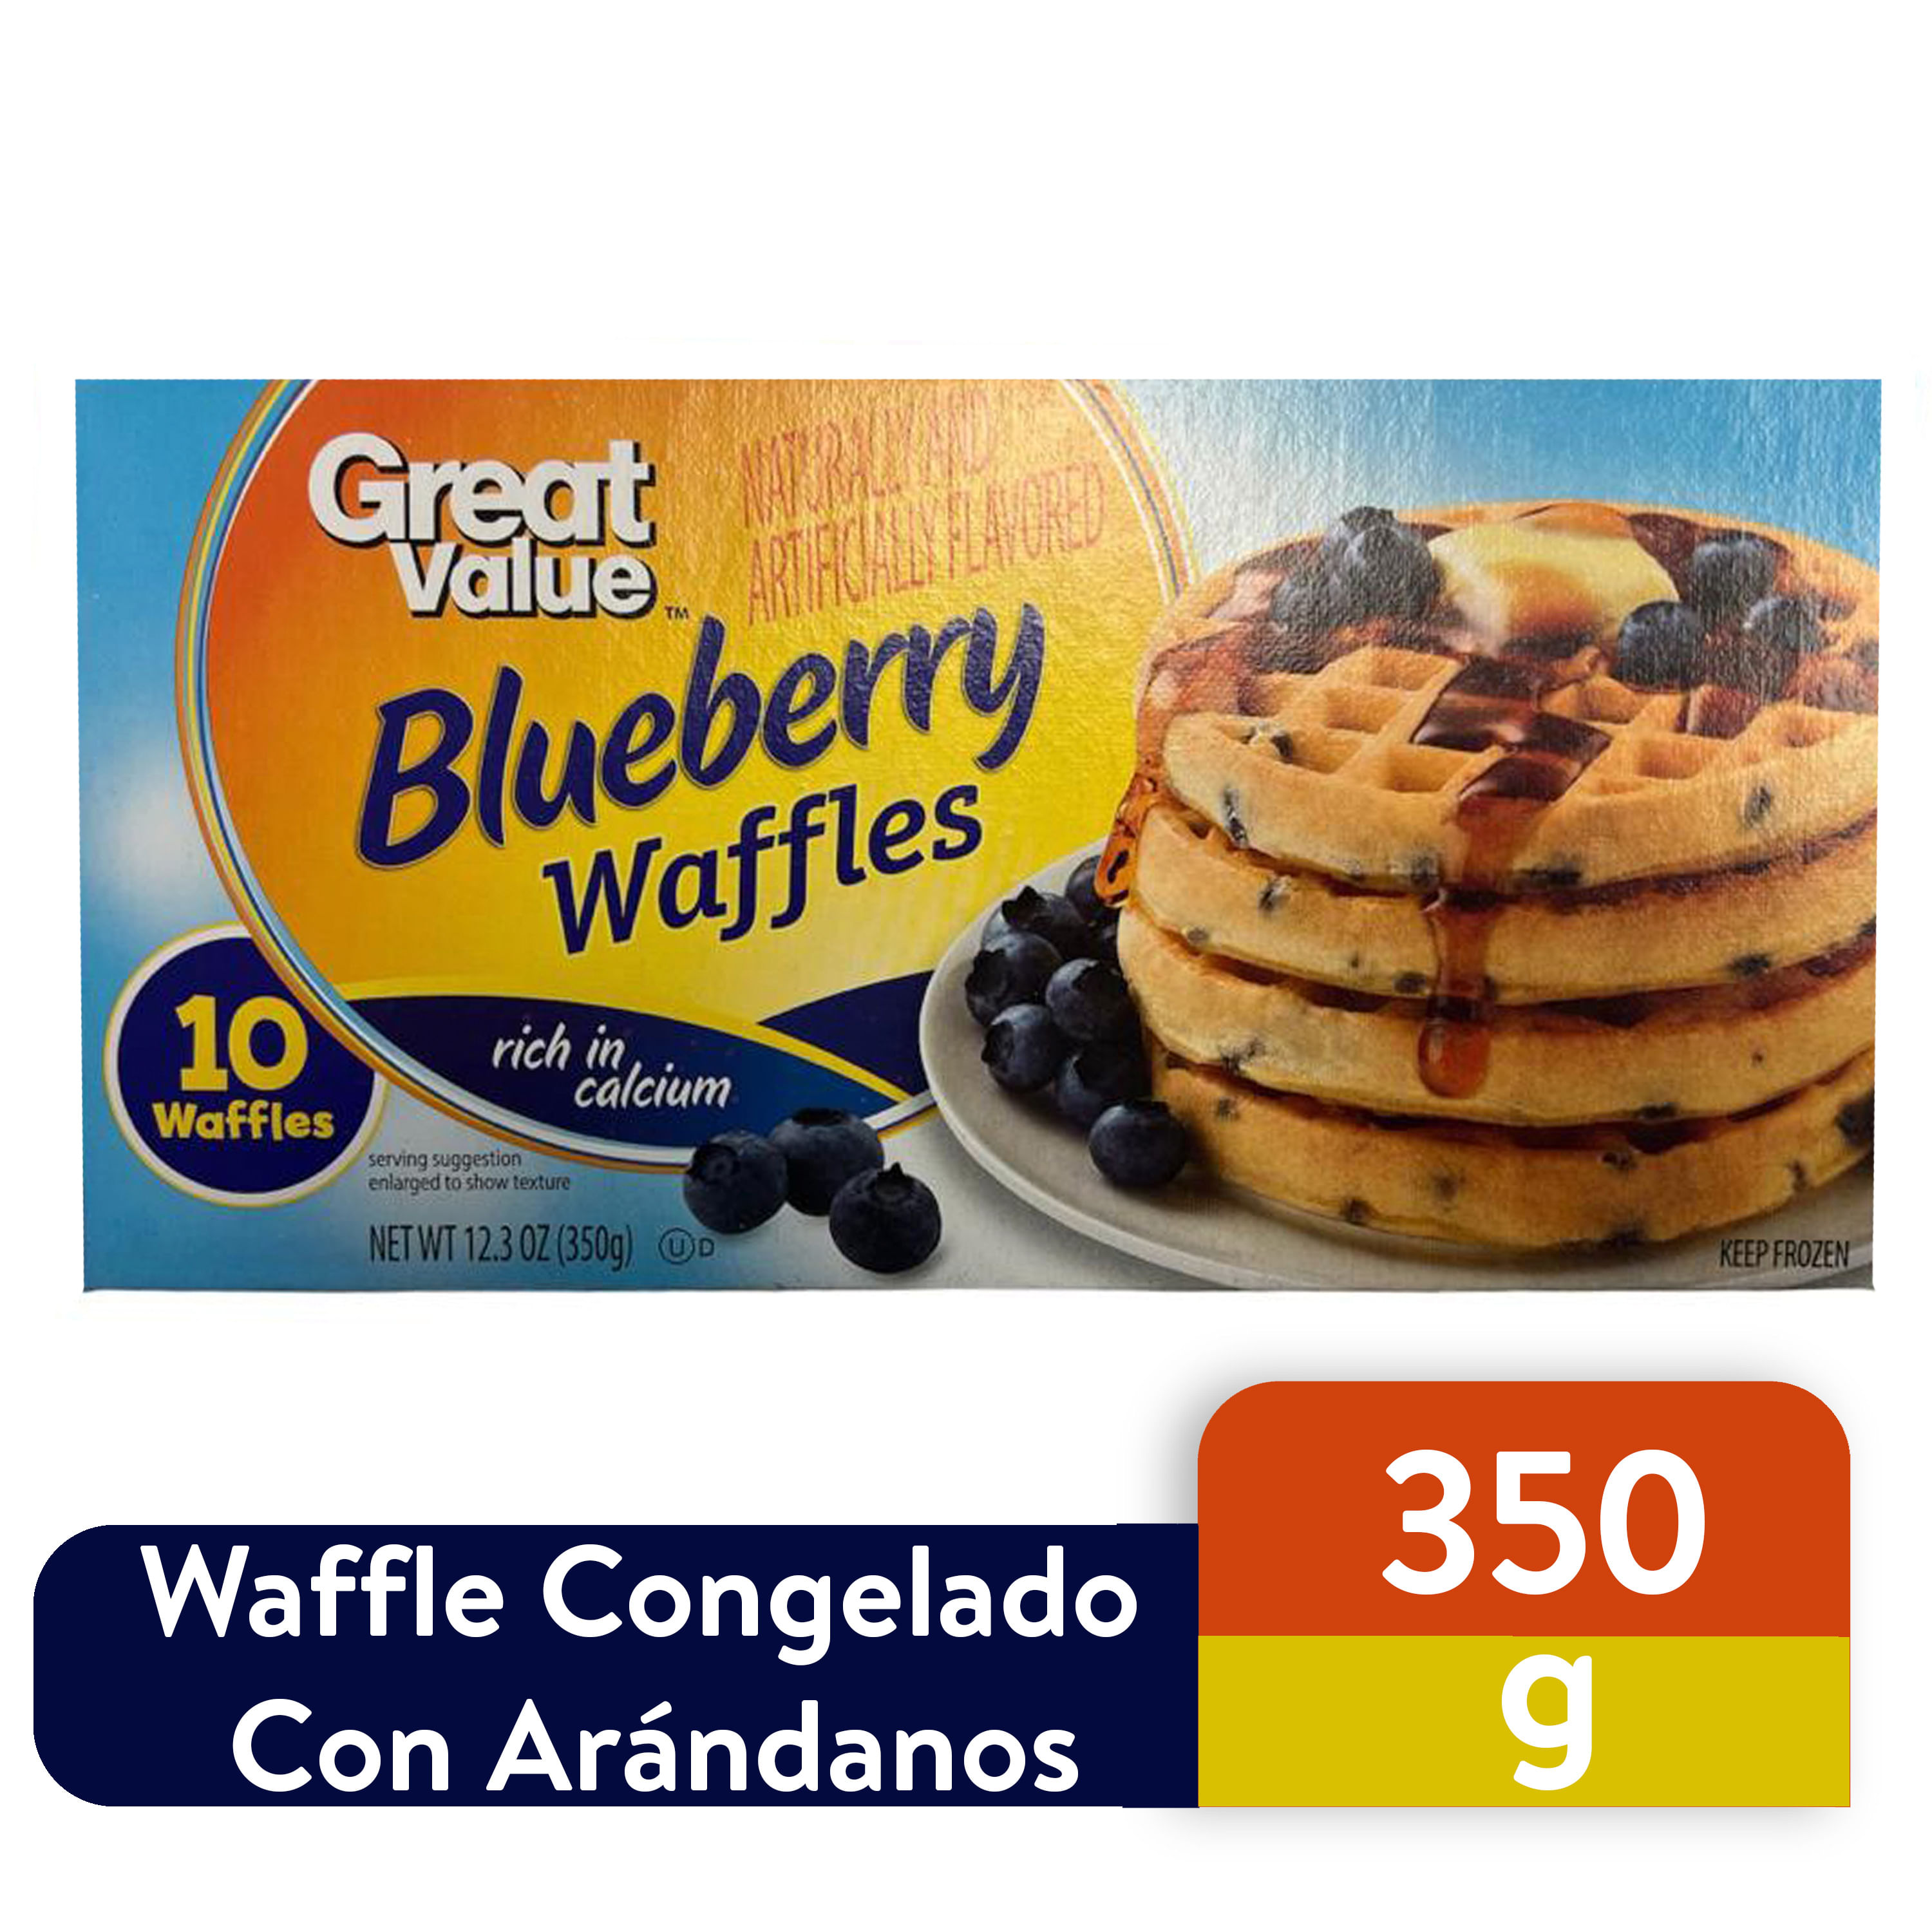 Waffles-Great-Value-Blueberry-10unidades-350gr-1-7232